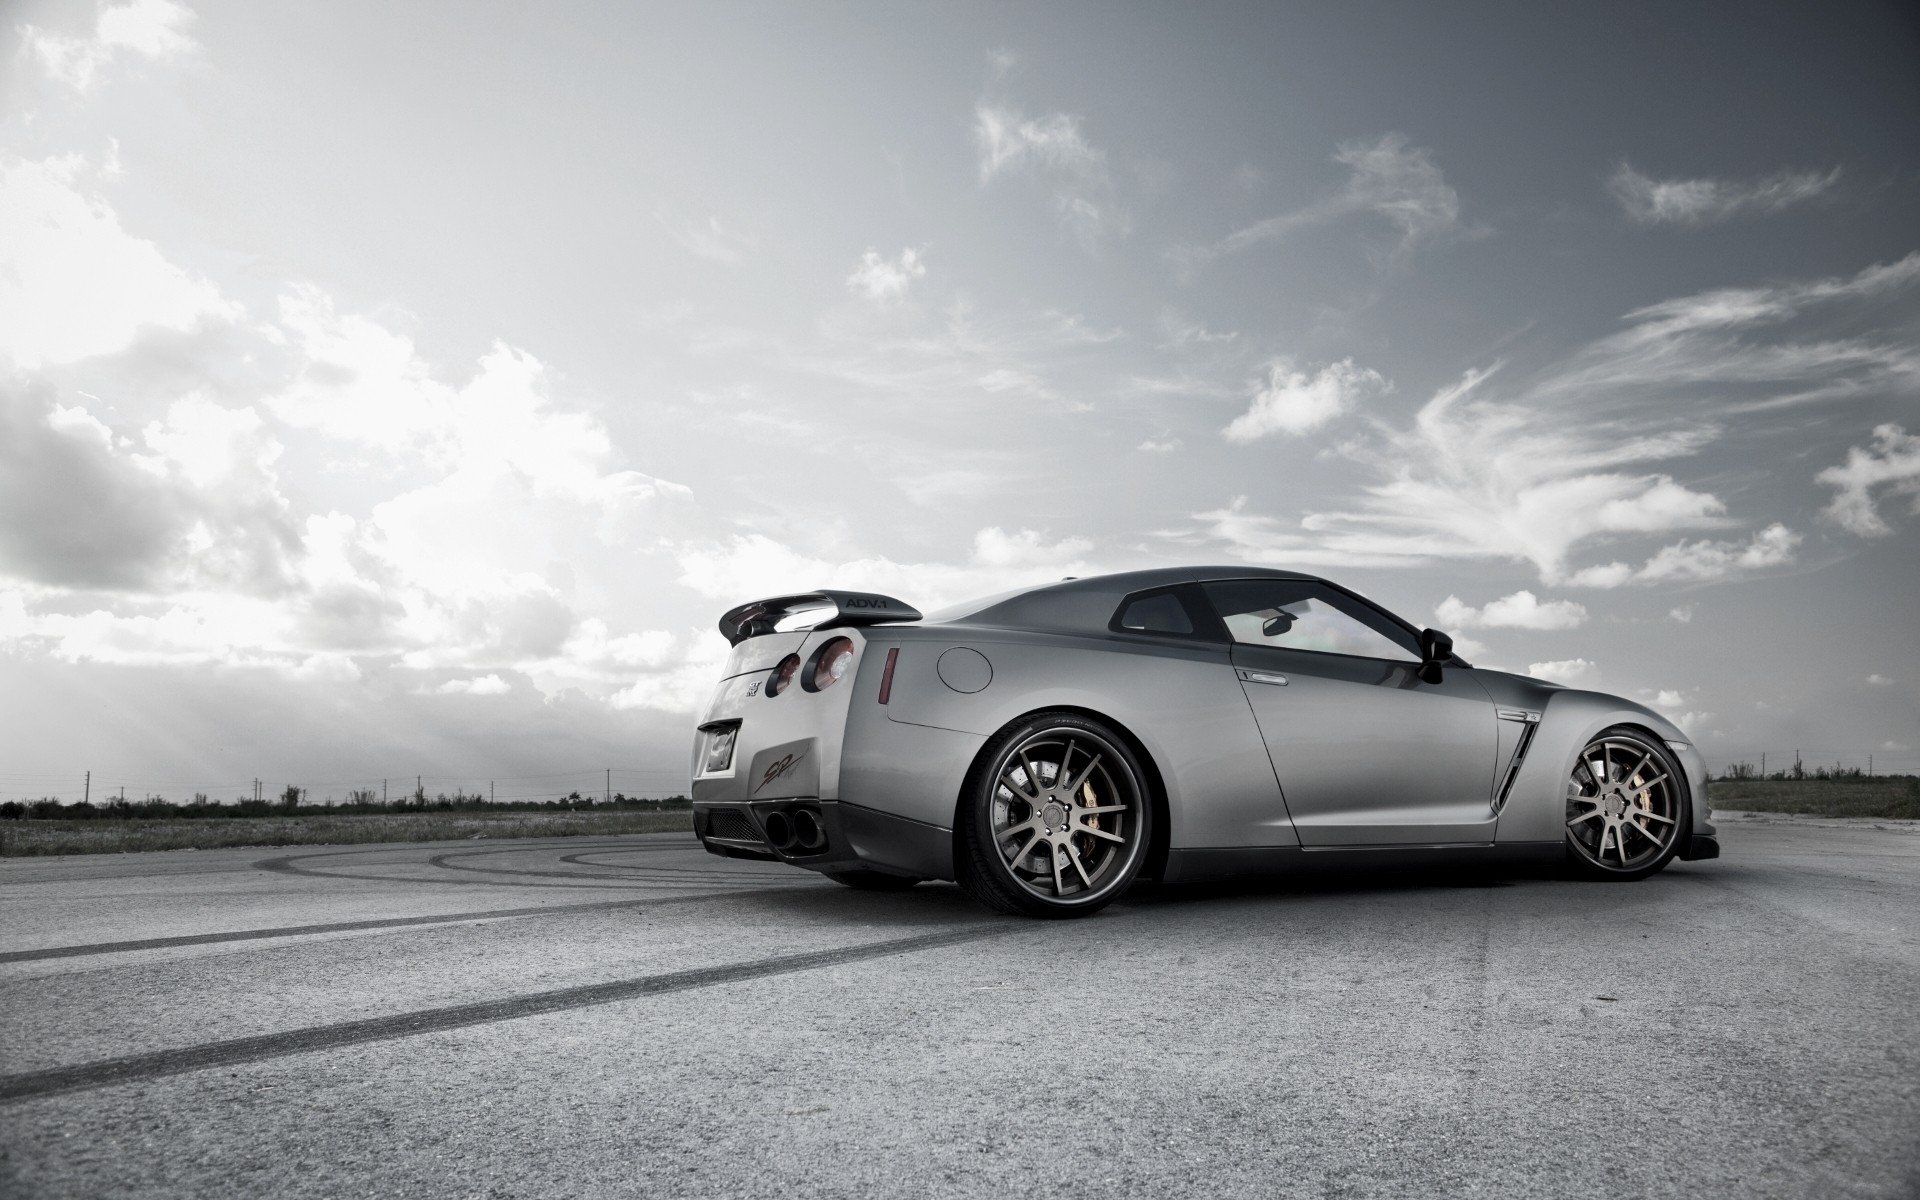 cars, Nissan, Low angle, Shot, Nissan, Gt r, R35 Wallpaper